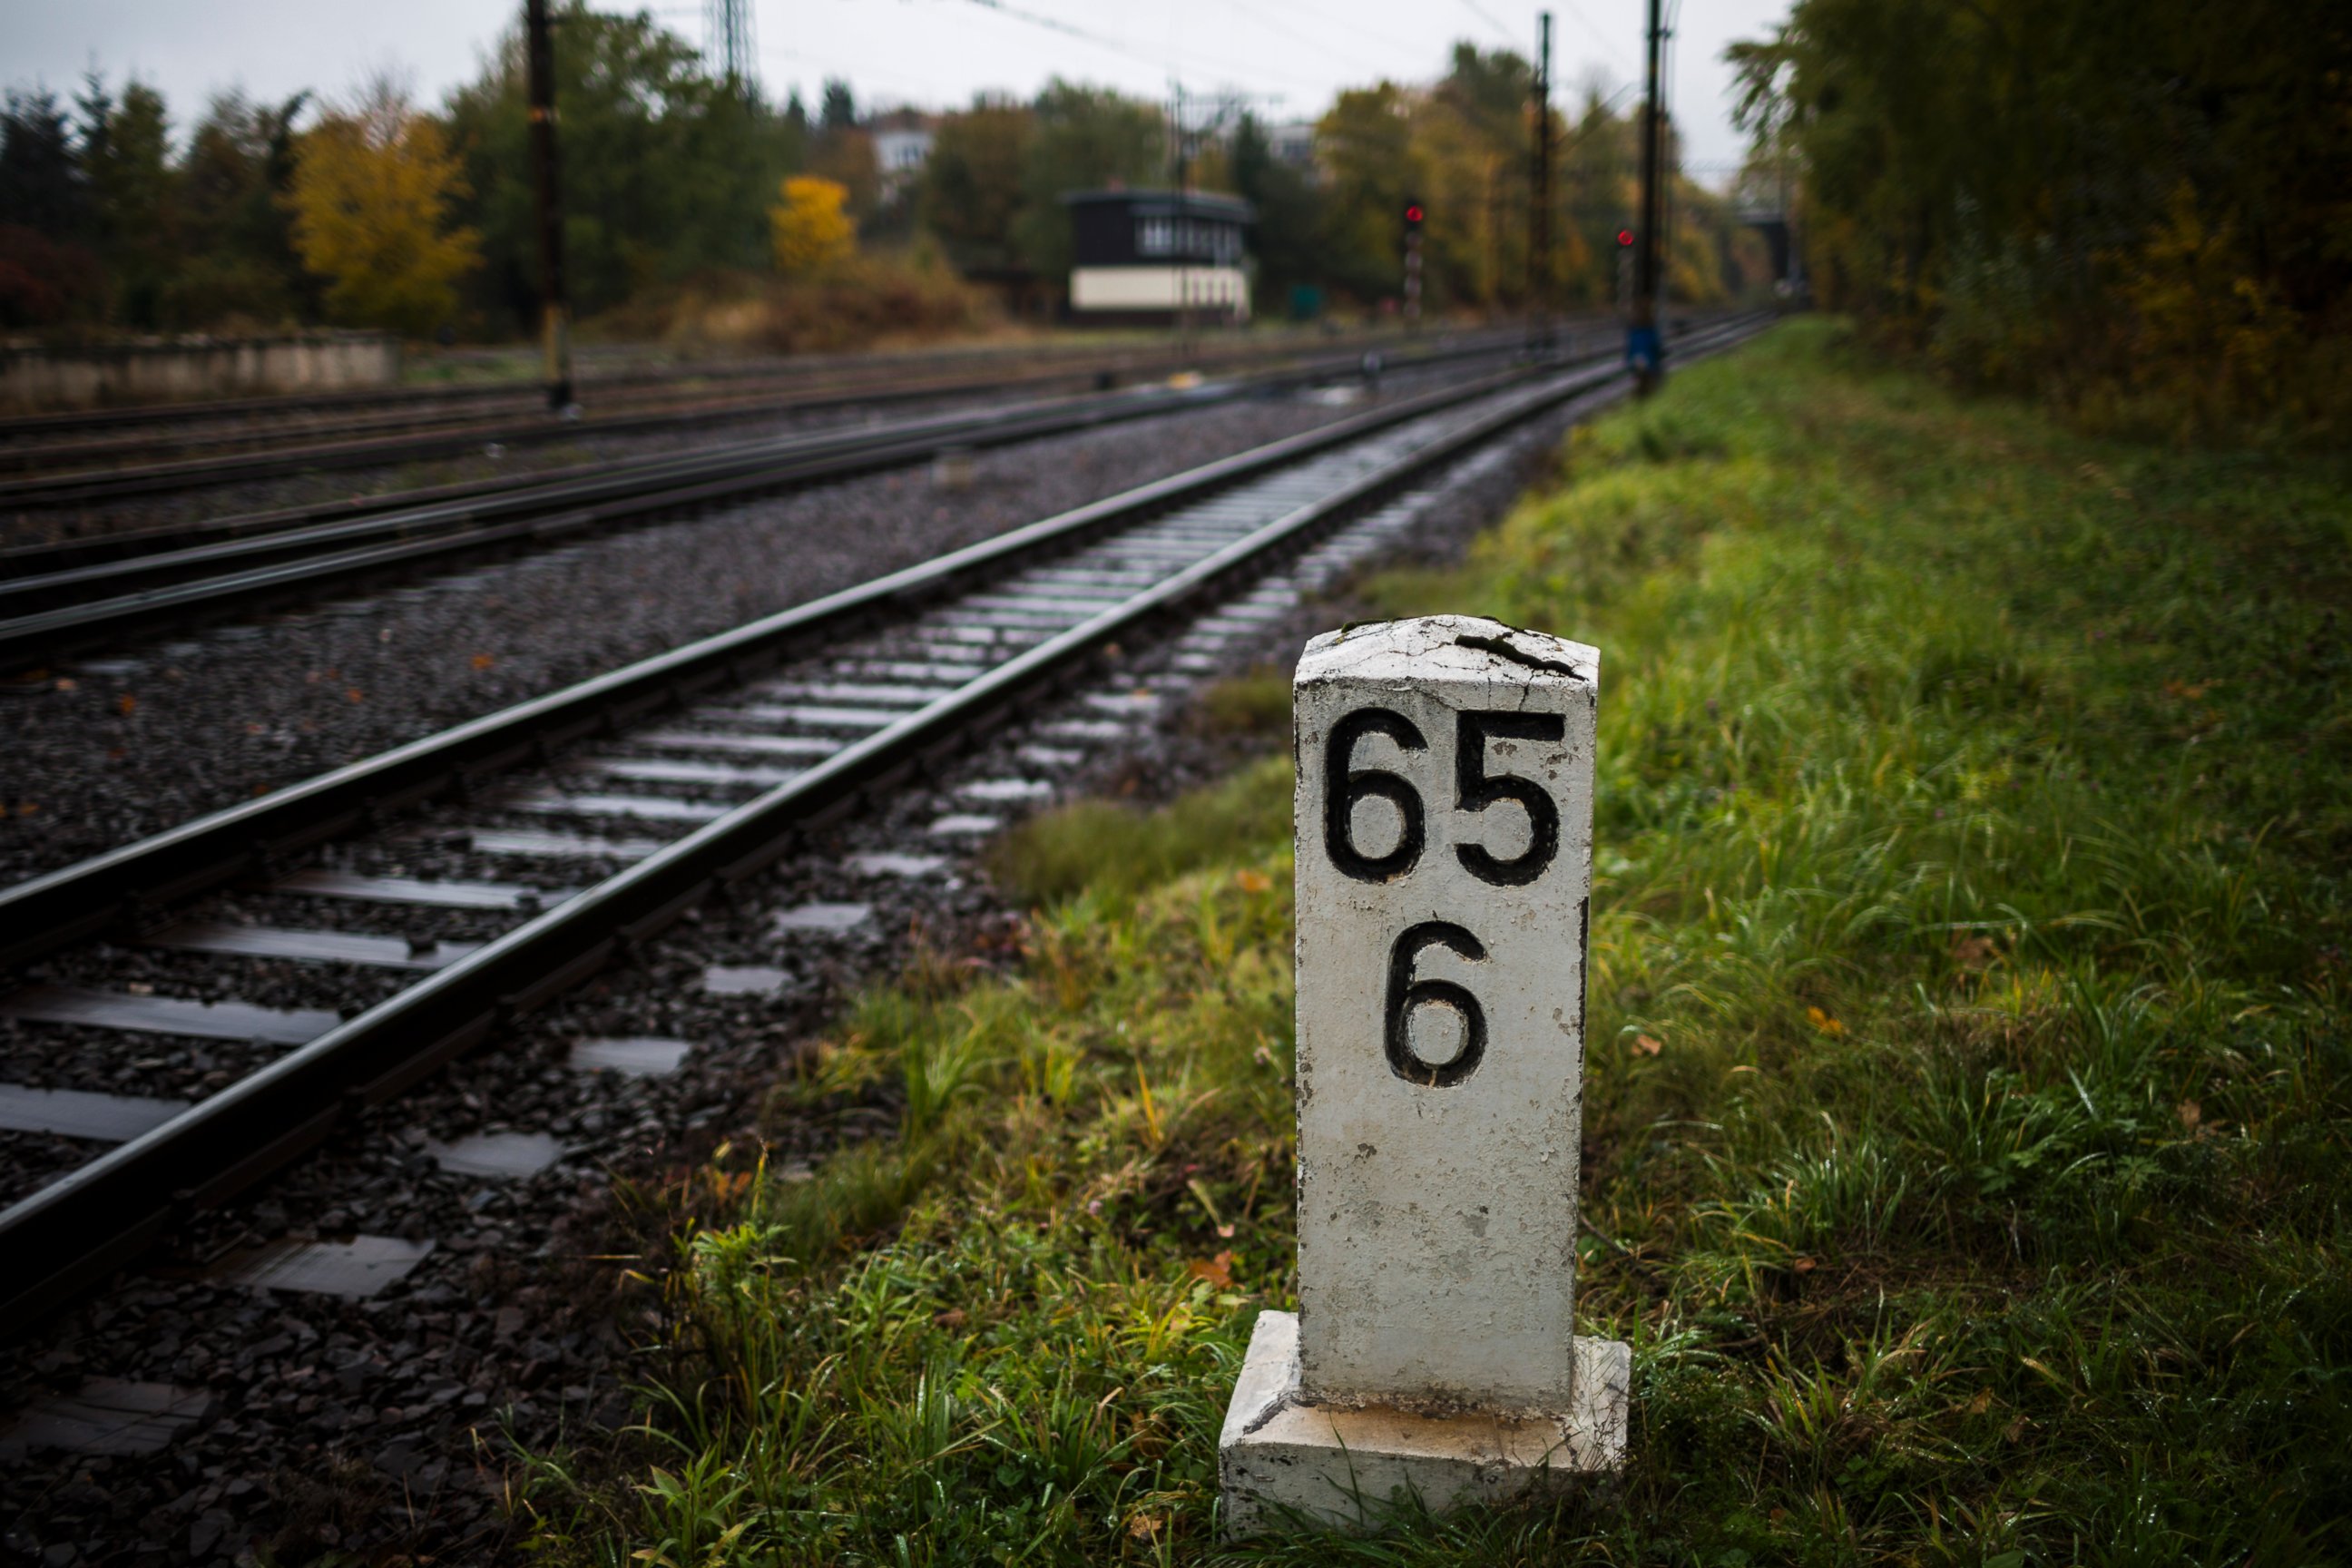 PHOTO: Railroad tracks at 65 km between Wroclaw and Walbrzych where Polish authorities are almost certain they located the "Nazi Gold train" on Oct. 20, 2015, In Walbrzych, Poland.